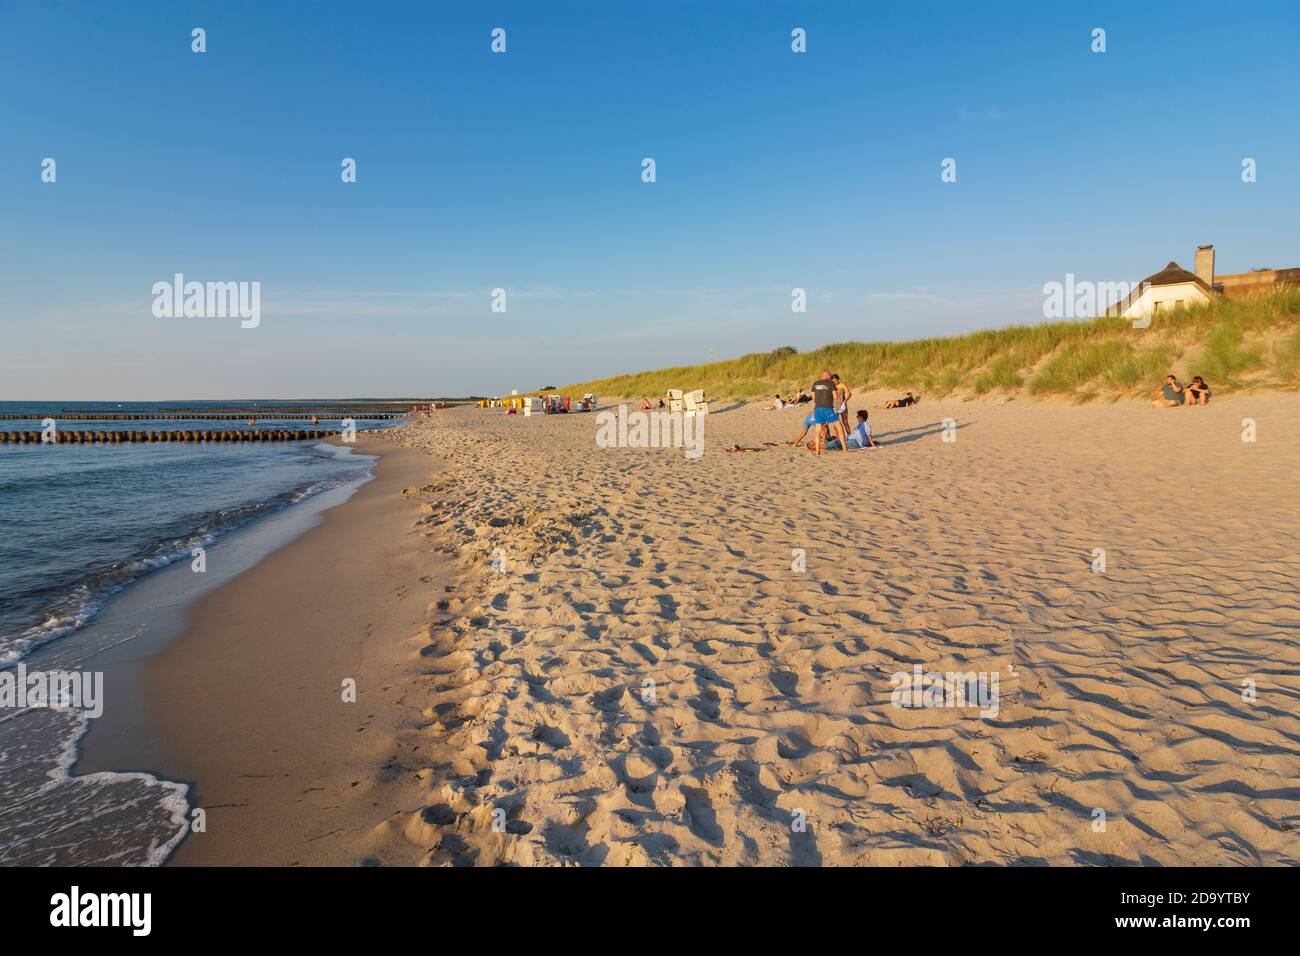 Ahrenshoop: beach, bather, brakewater, traditional thatched roof house, Ostsee (Baltic Sea), Fischland peninsula, Mecklenburg-Vorpommern, Germany Stock Photo